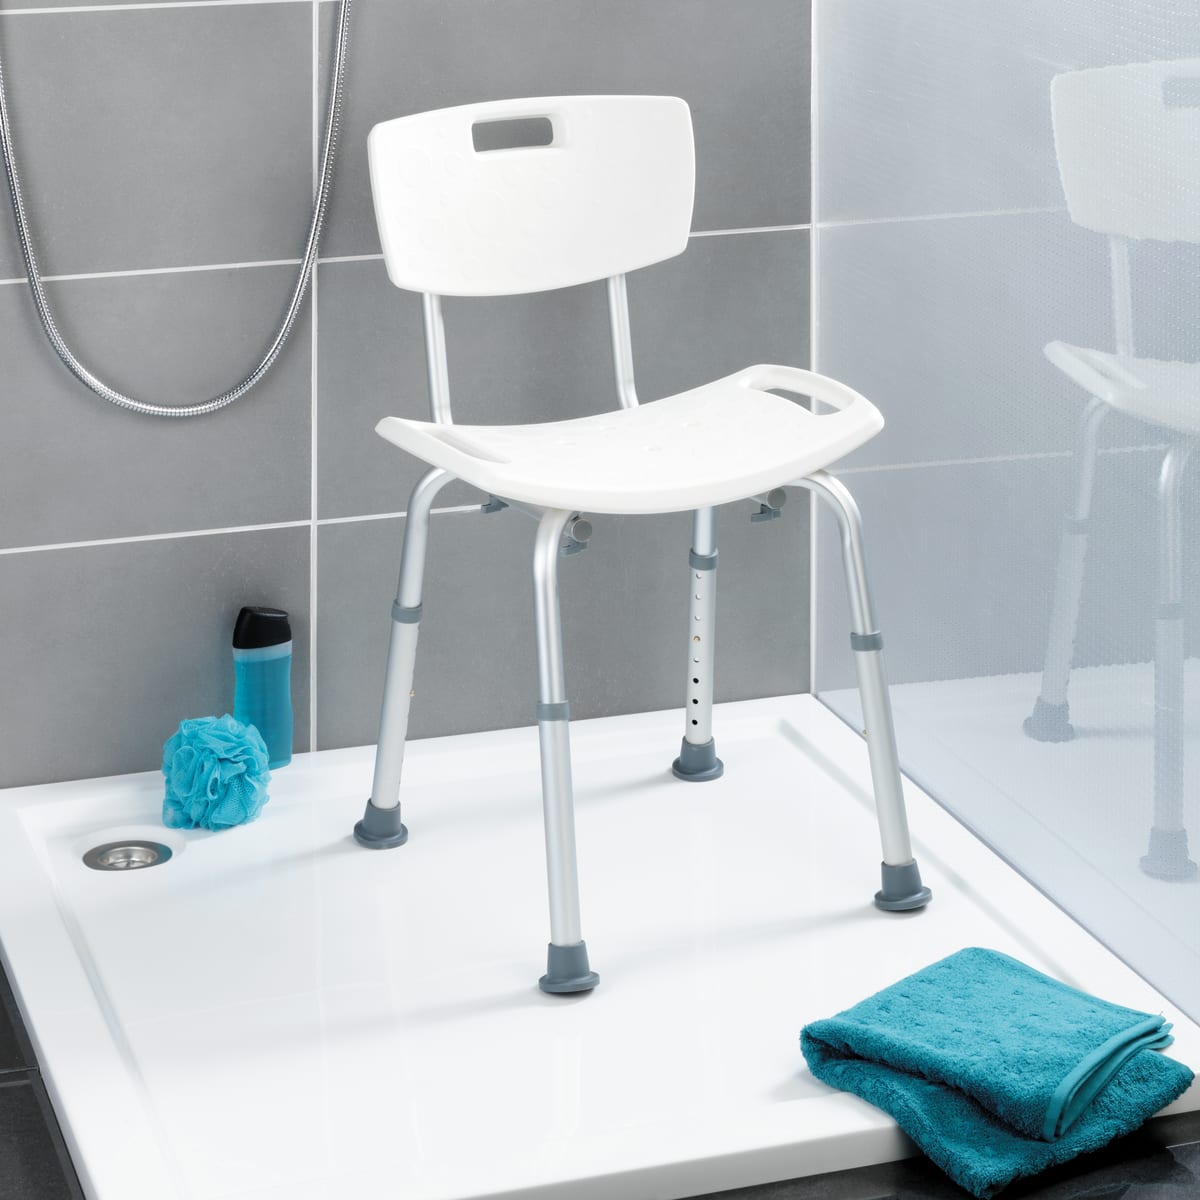 STOOL WITH BACKREST FOR SHOWER